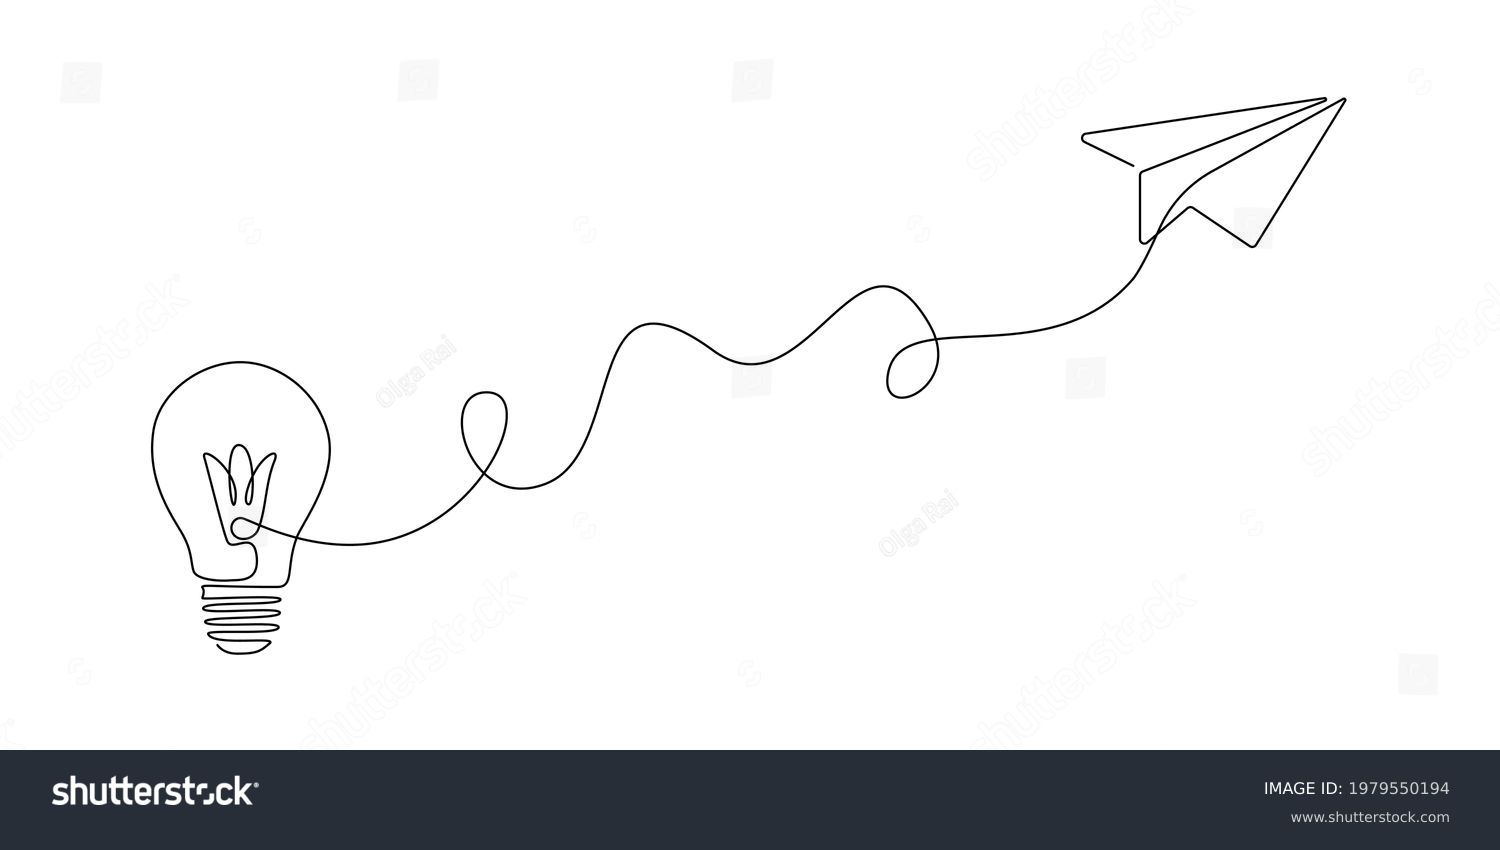 Paper plane flying up connected with light bulb in one continuous line drawing. Airplane in outline style. Startup business idea concept with editable stroke. Vector illustration #1979550194